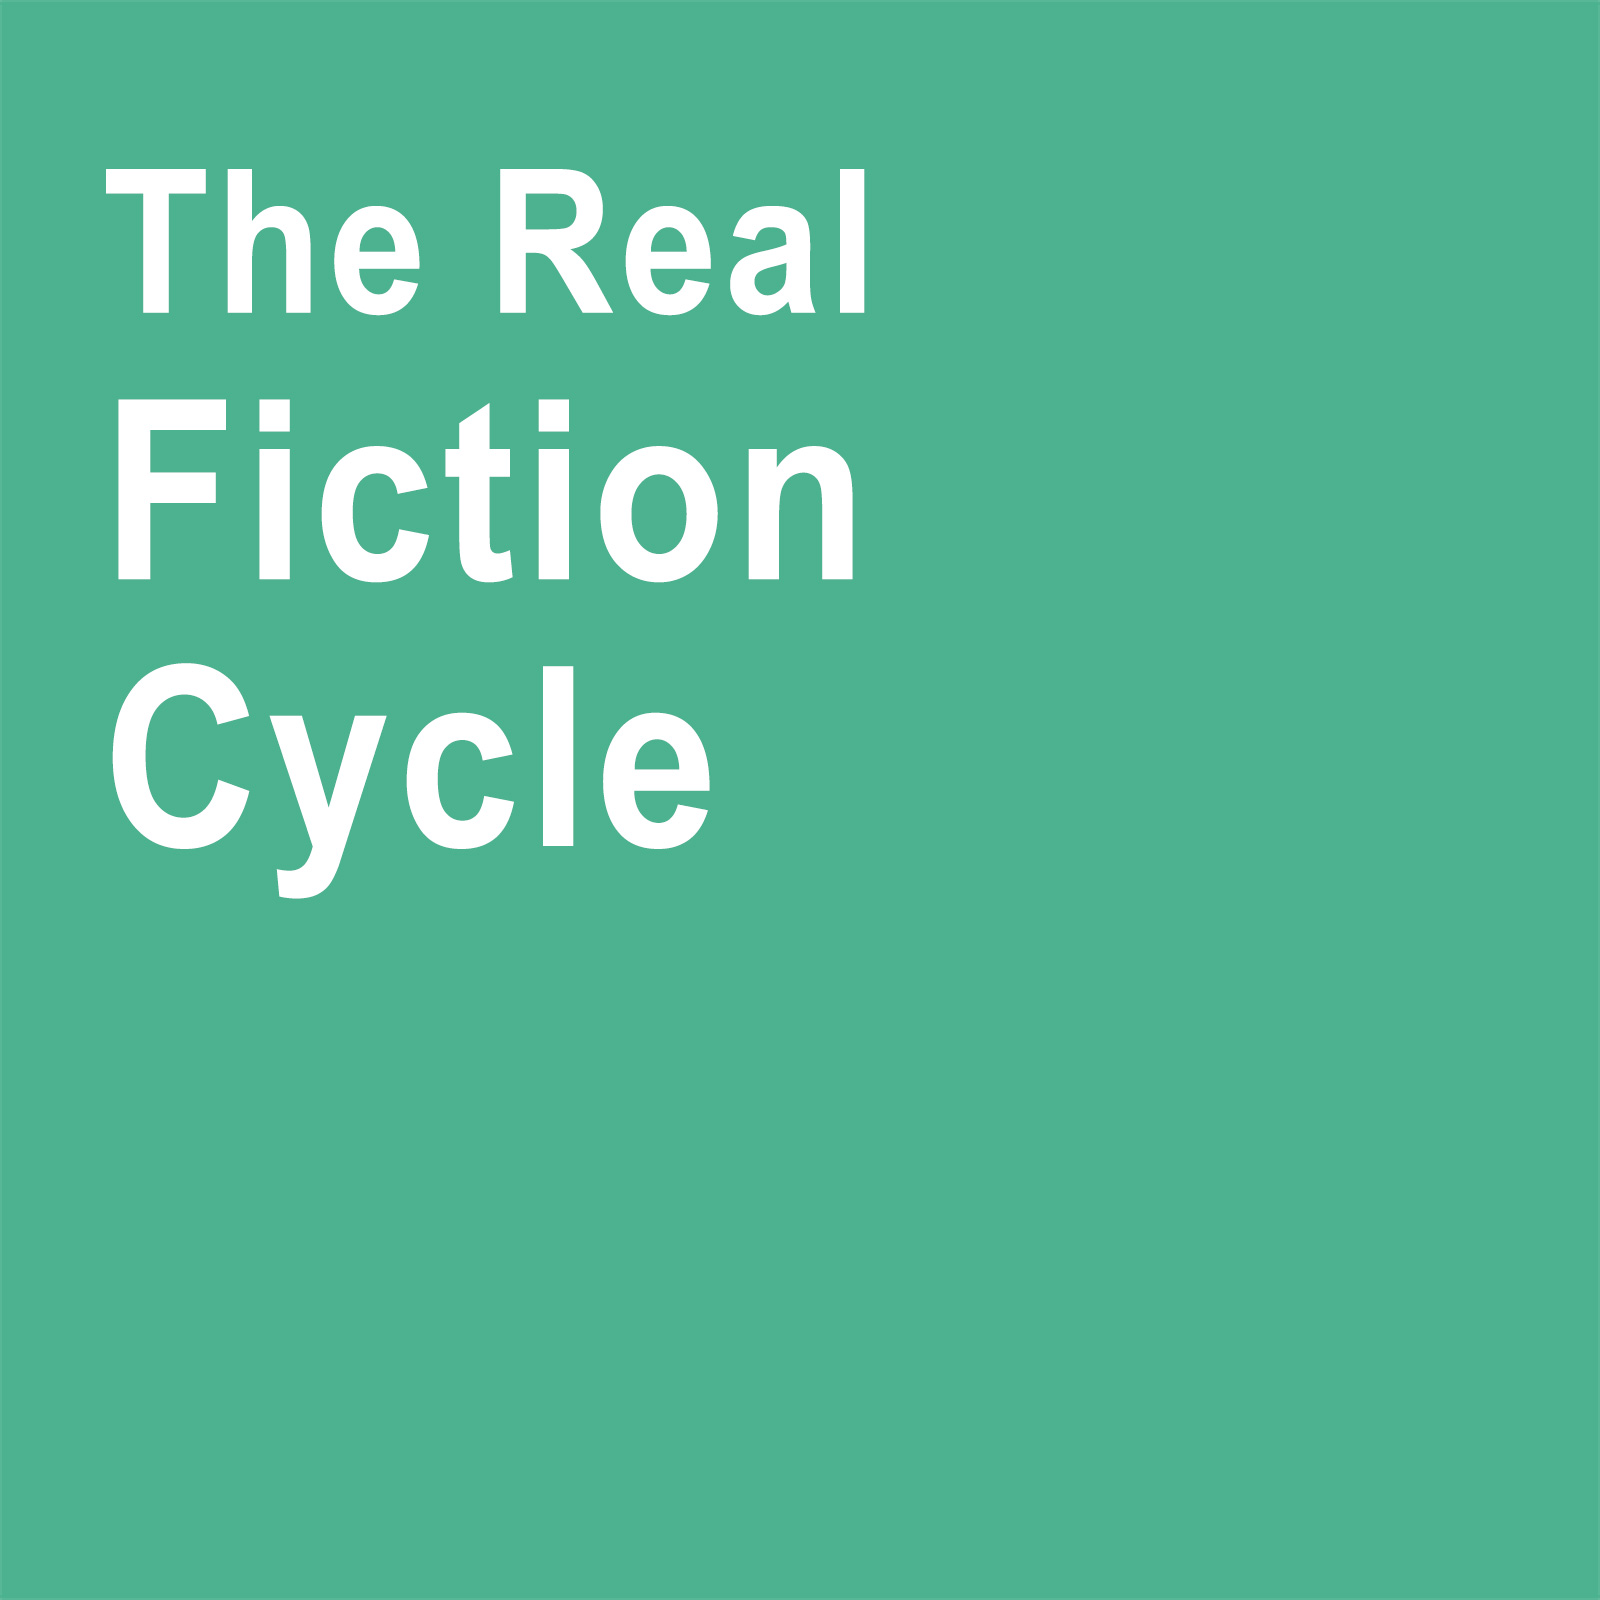 The Real Fiction Cycle